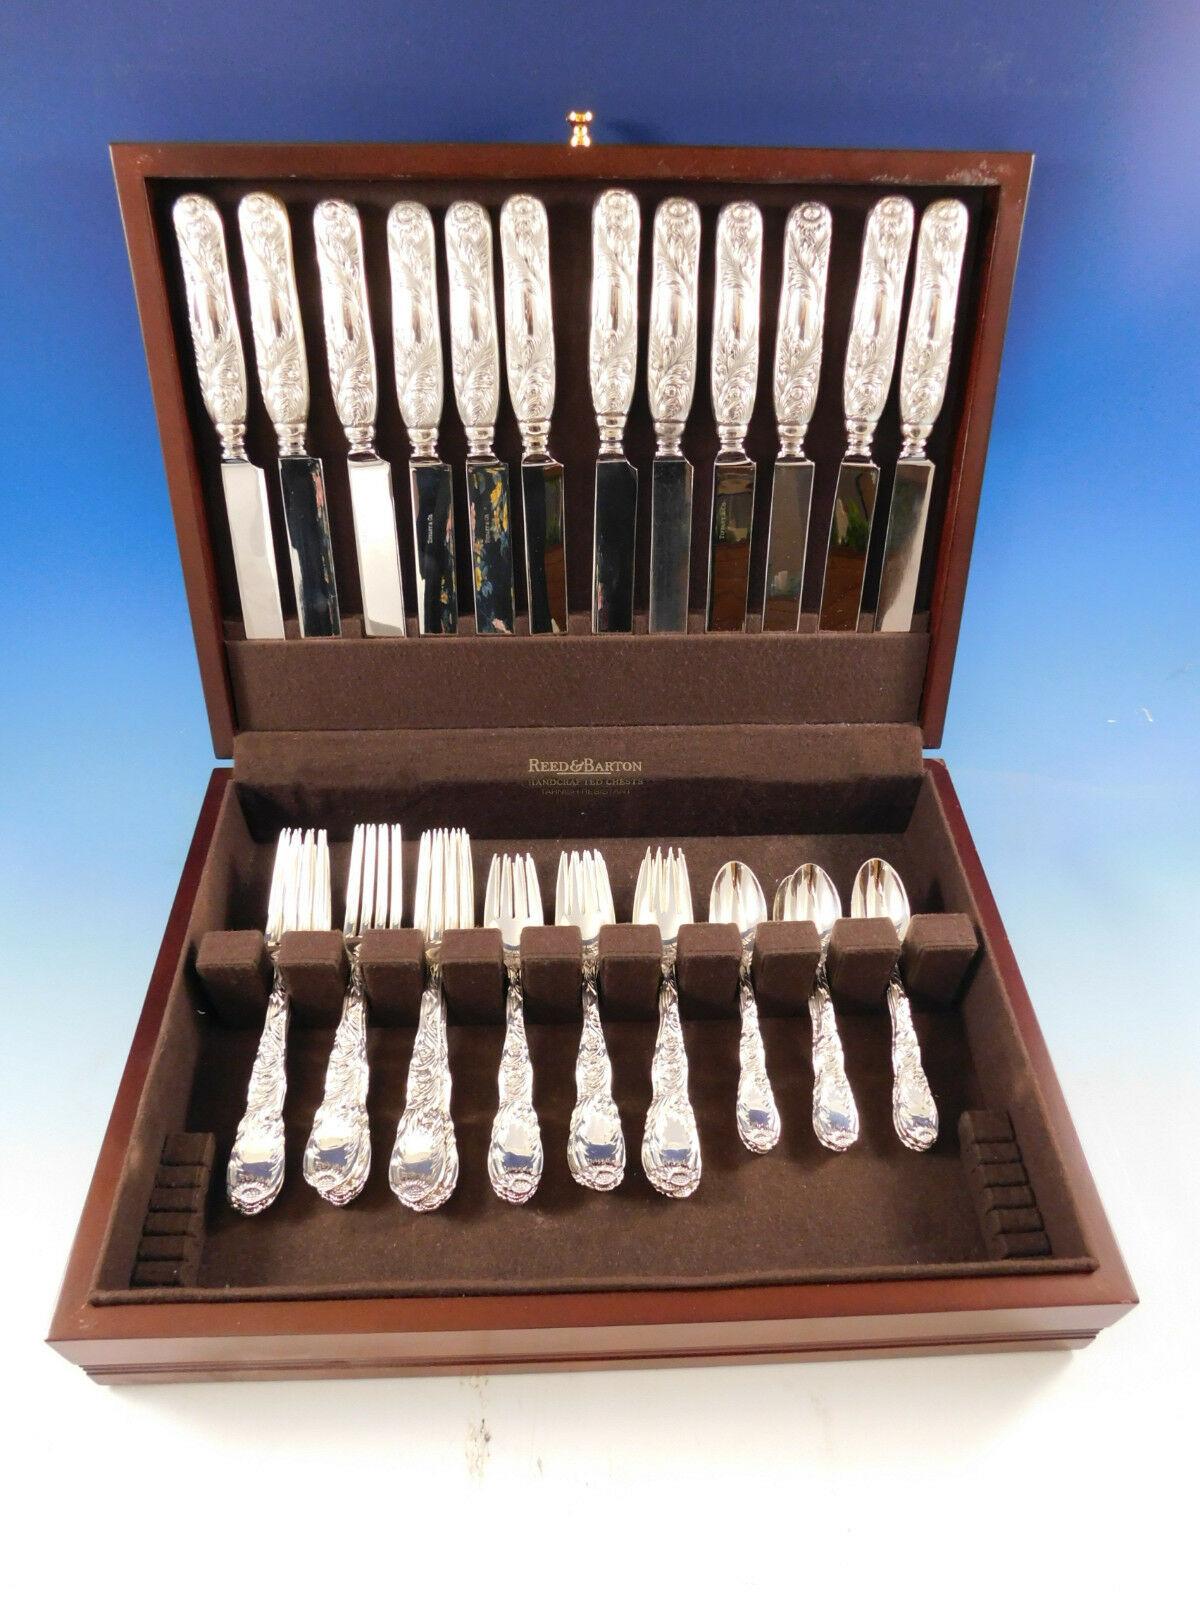 Superb dinner size Chrysanthemum by Tiffany & Co. sterling silver flatware set - 48 pieces. This set includes:

12 dinner size knives, 10 1/2